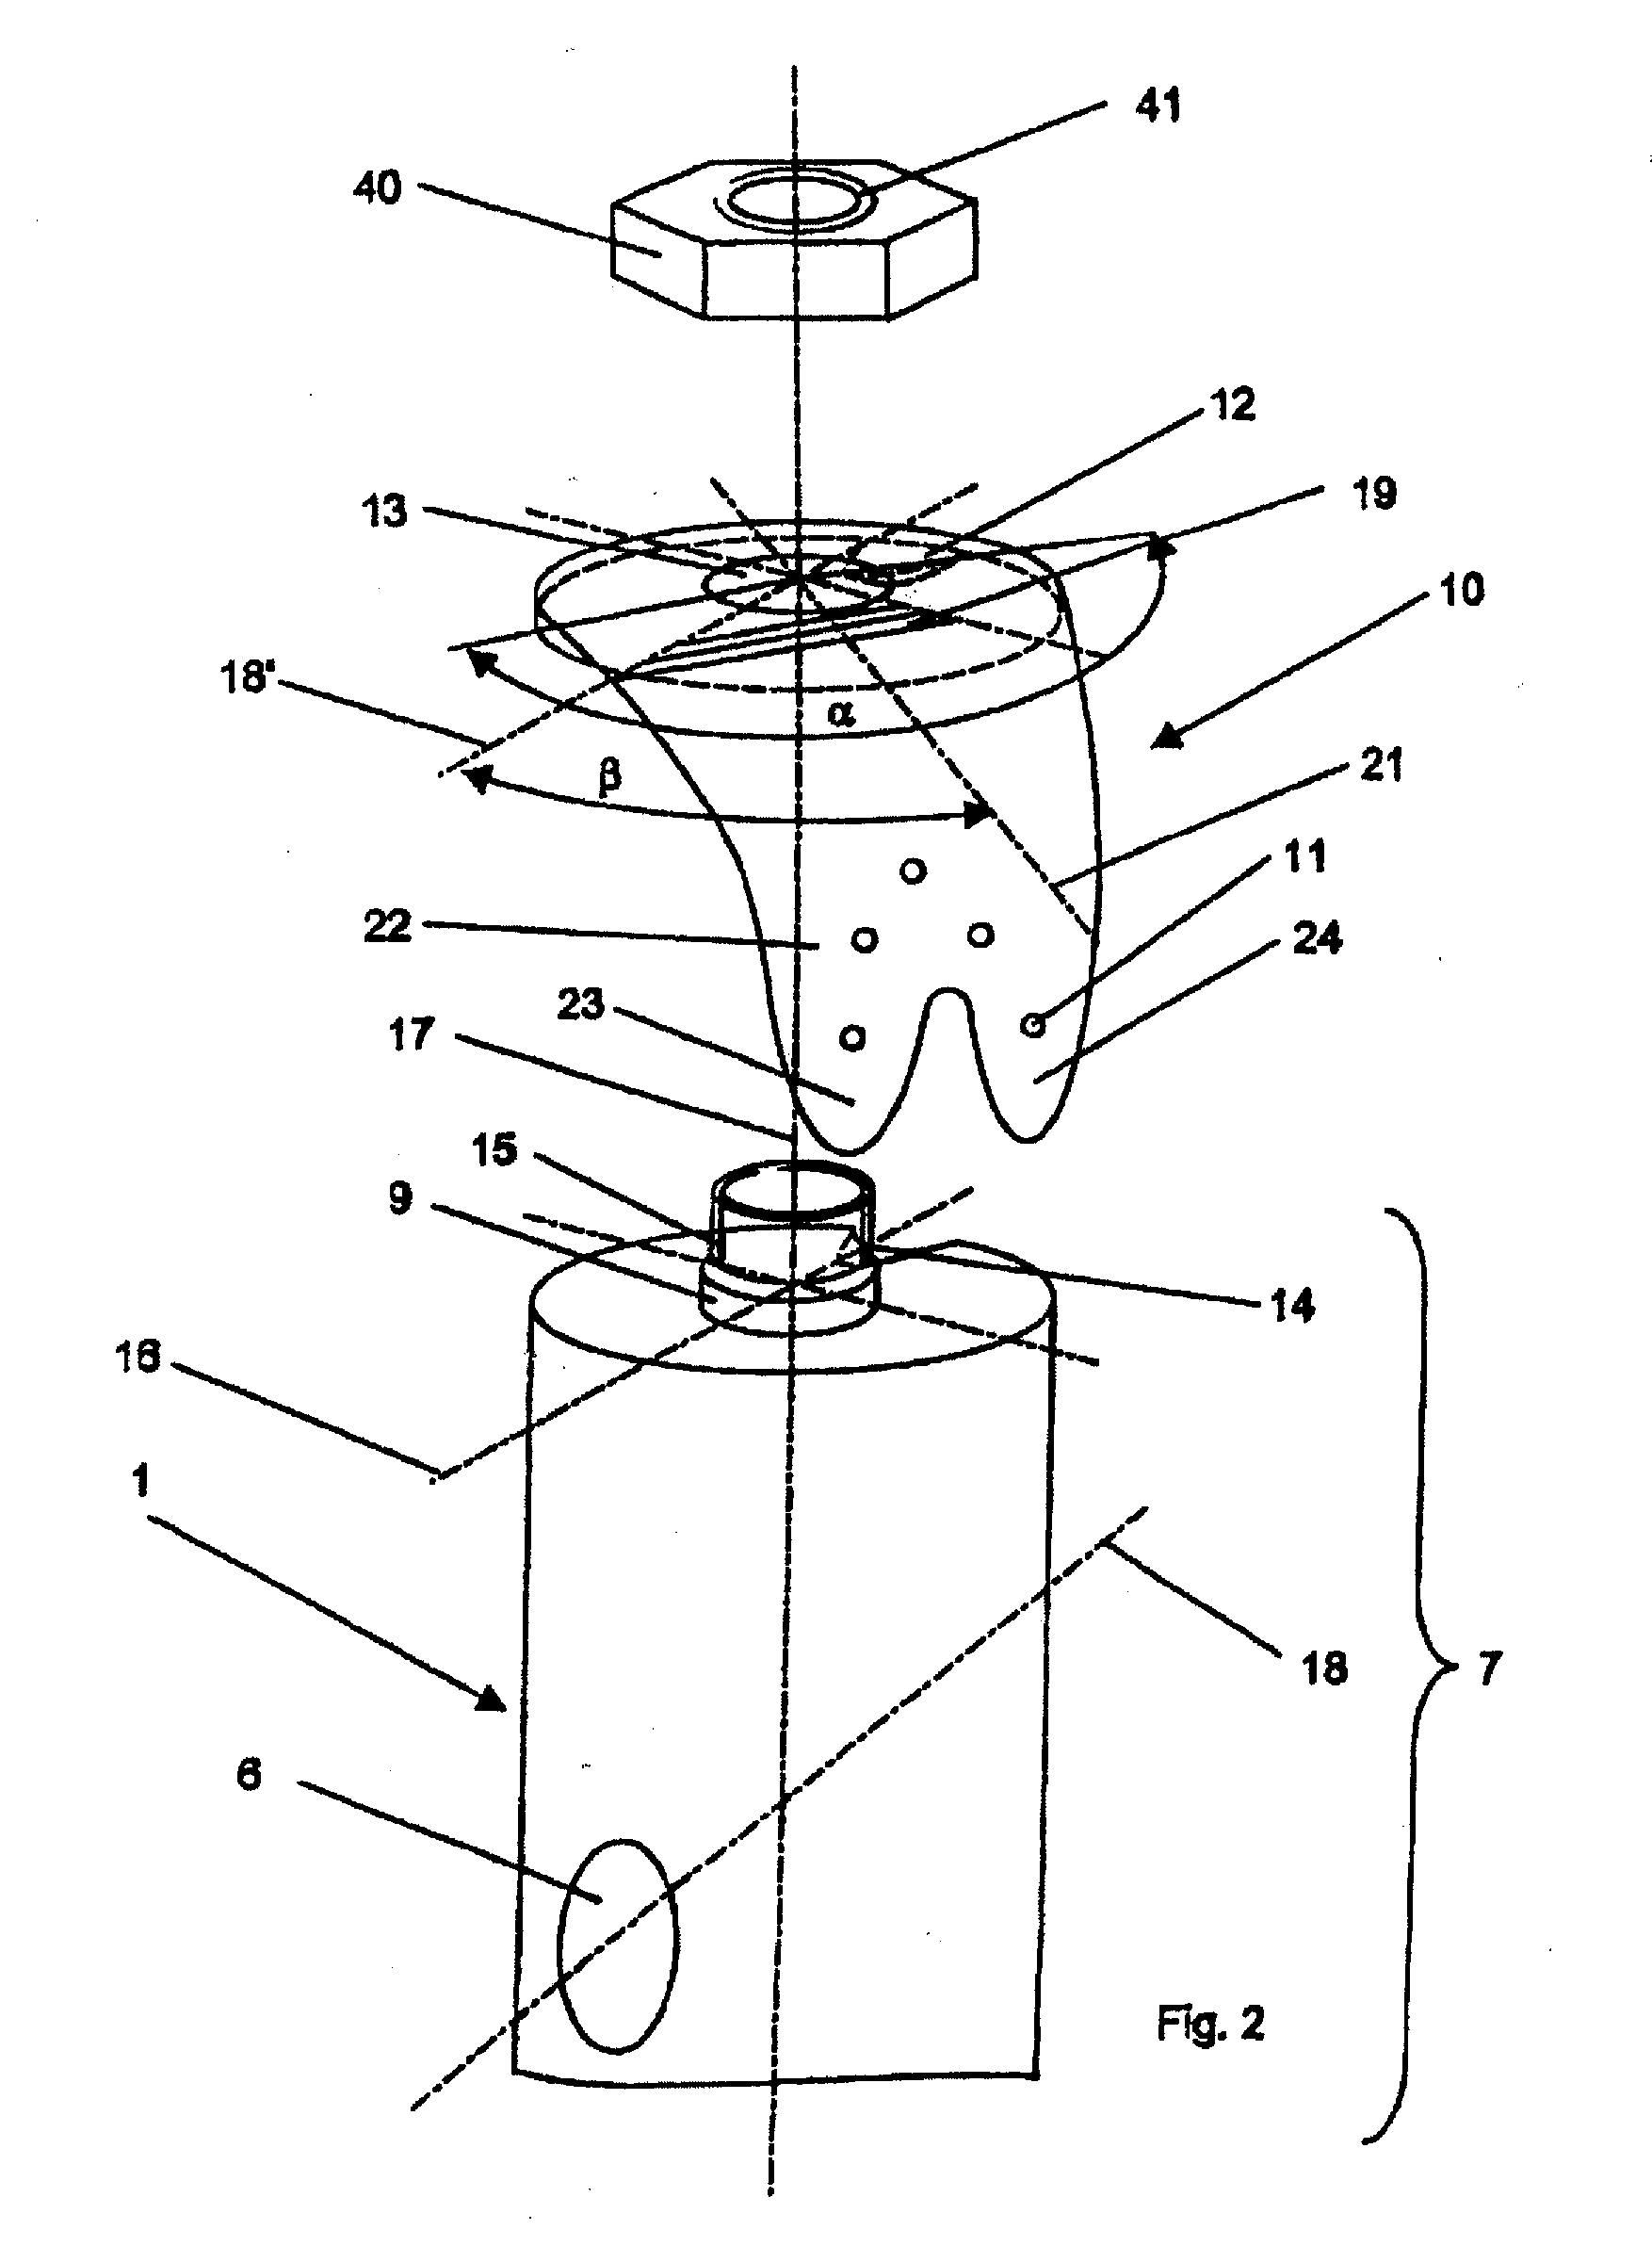 Device for Bone Fixation